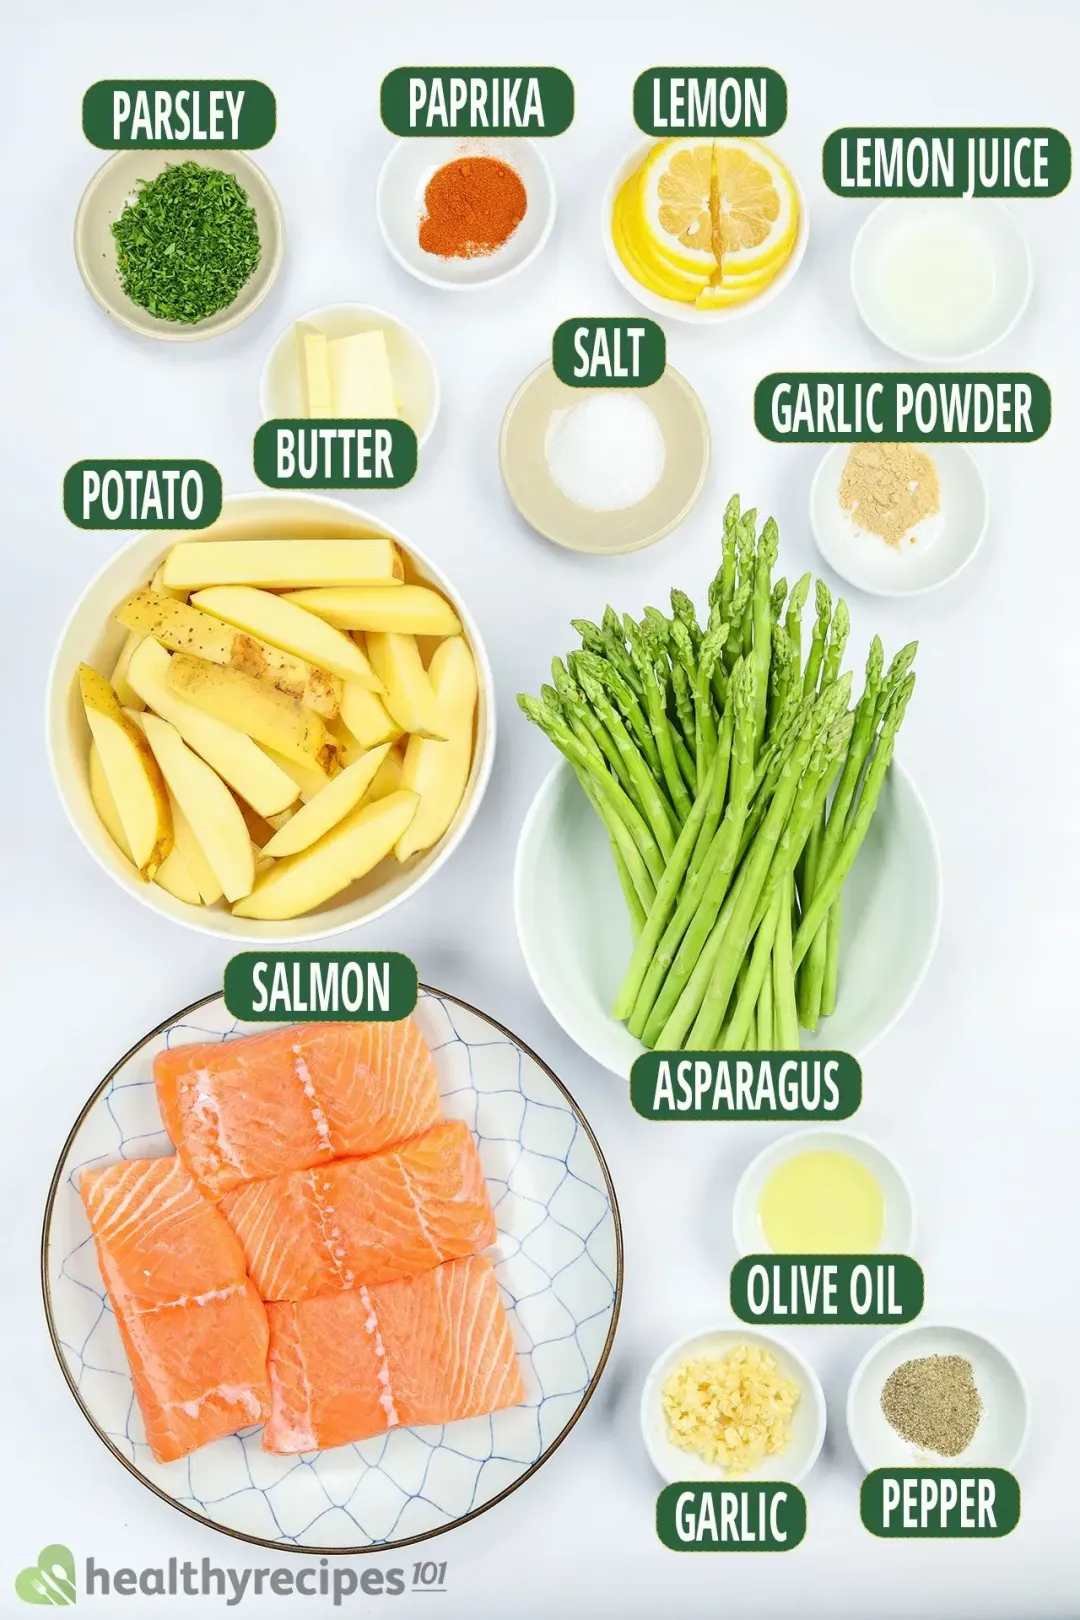 Plates containing salmon fillets, asparagus stalks, potato wedges, lemon slices, chopped parsley, and various spices